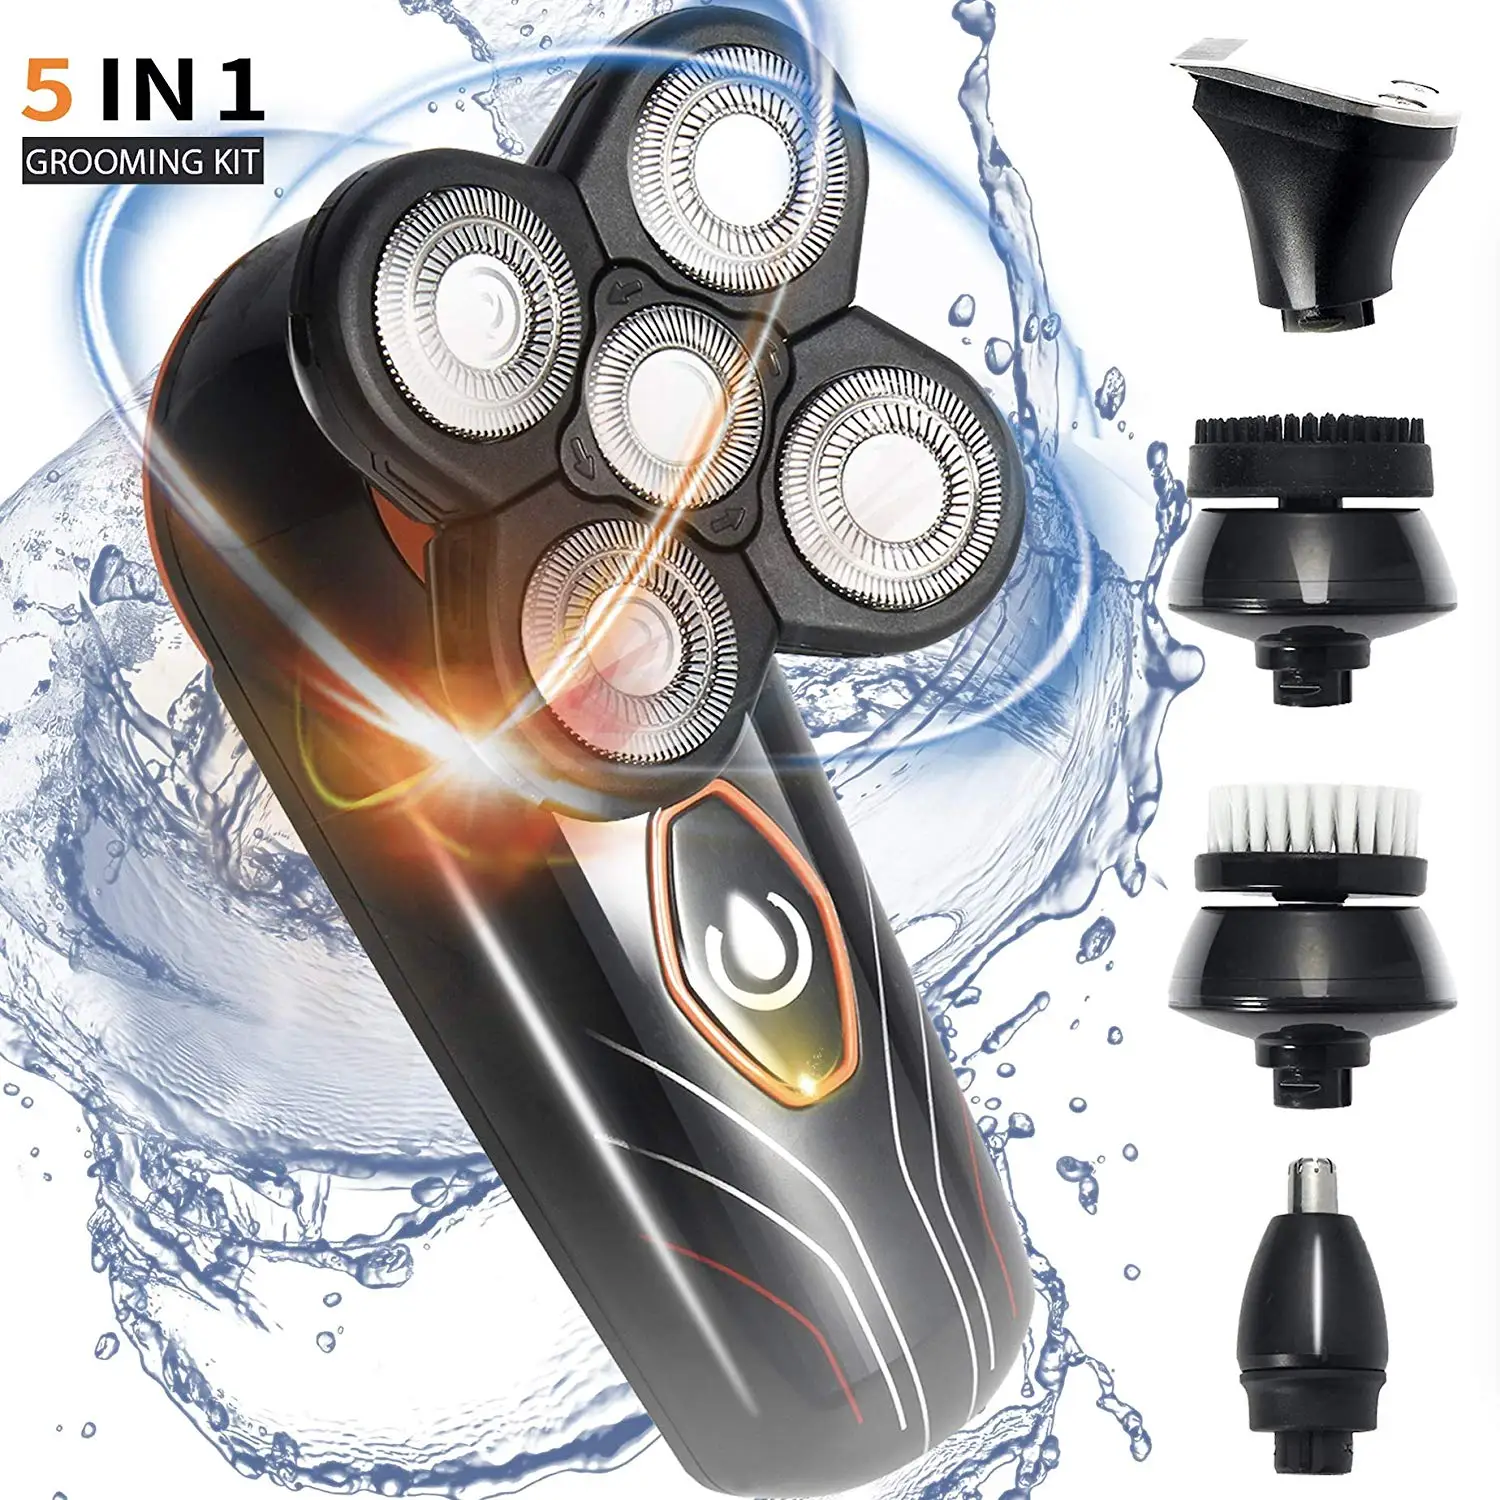 

Men 5 in 1 Electric Beard Shaver Bald Head Grooming Set Hair Trimmer Facial Brush Hair Razors USB Rechargeable Cordless Grooming